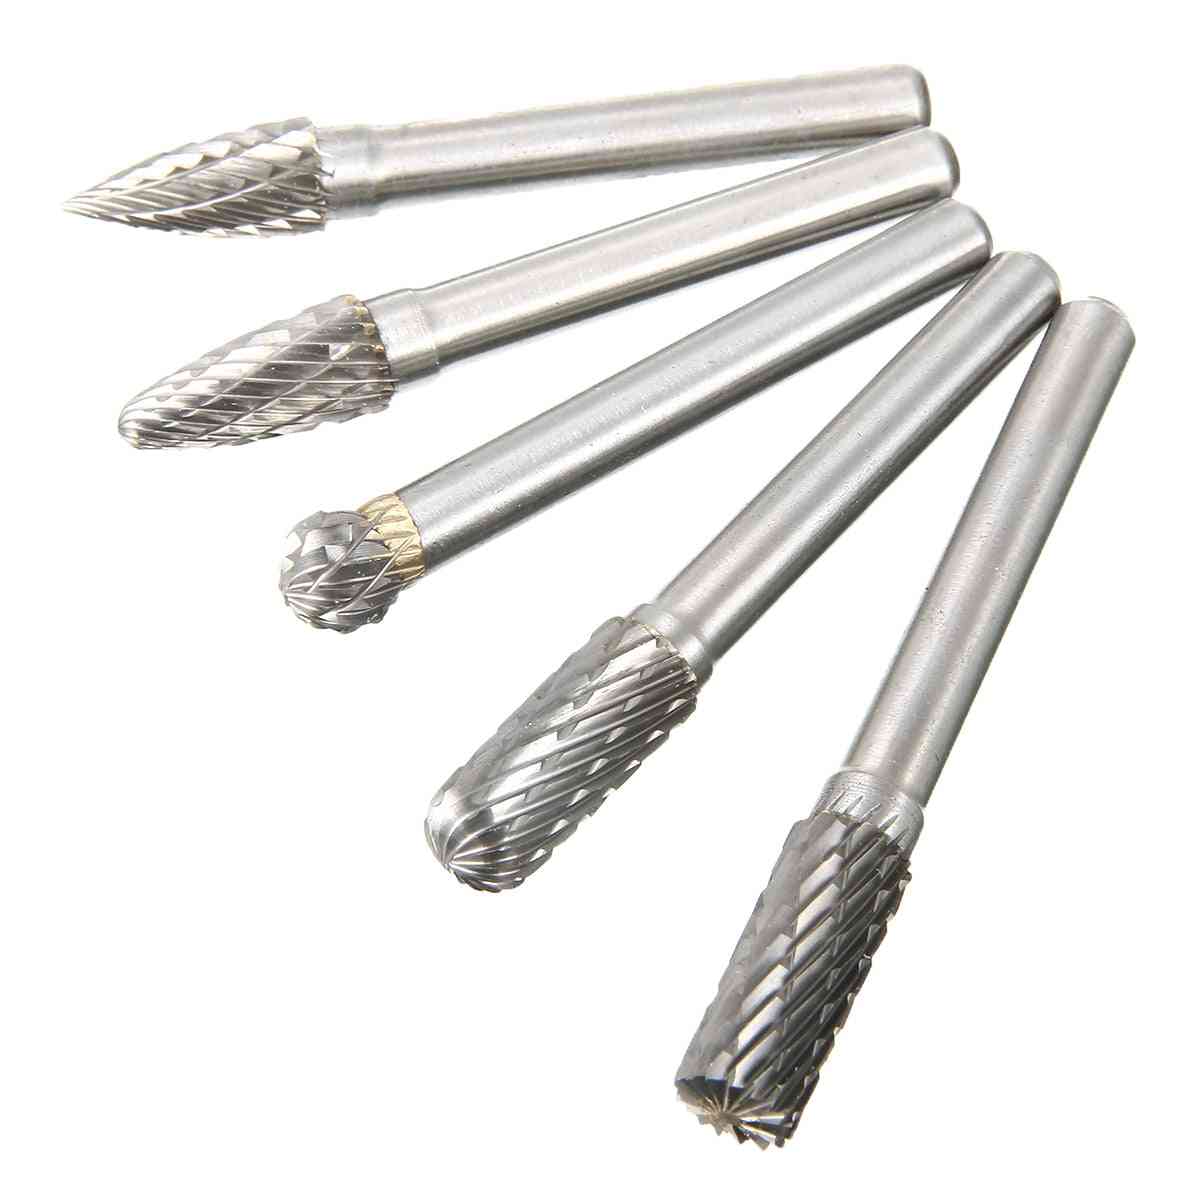 Rotary Point Burrs, Electric Grinder, Shank Bits Set For Finishing Metal Molds